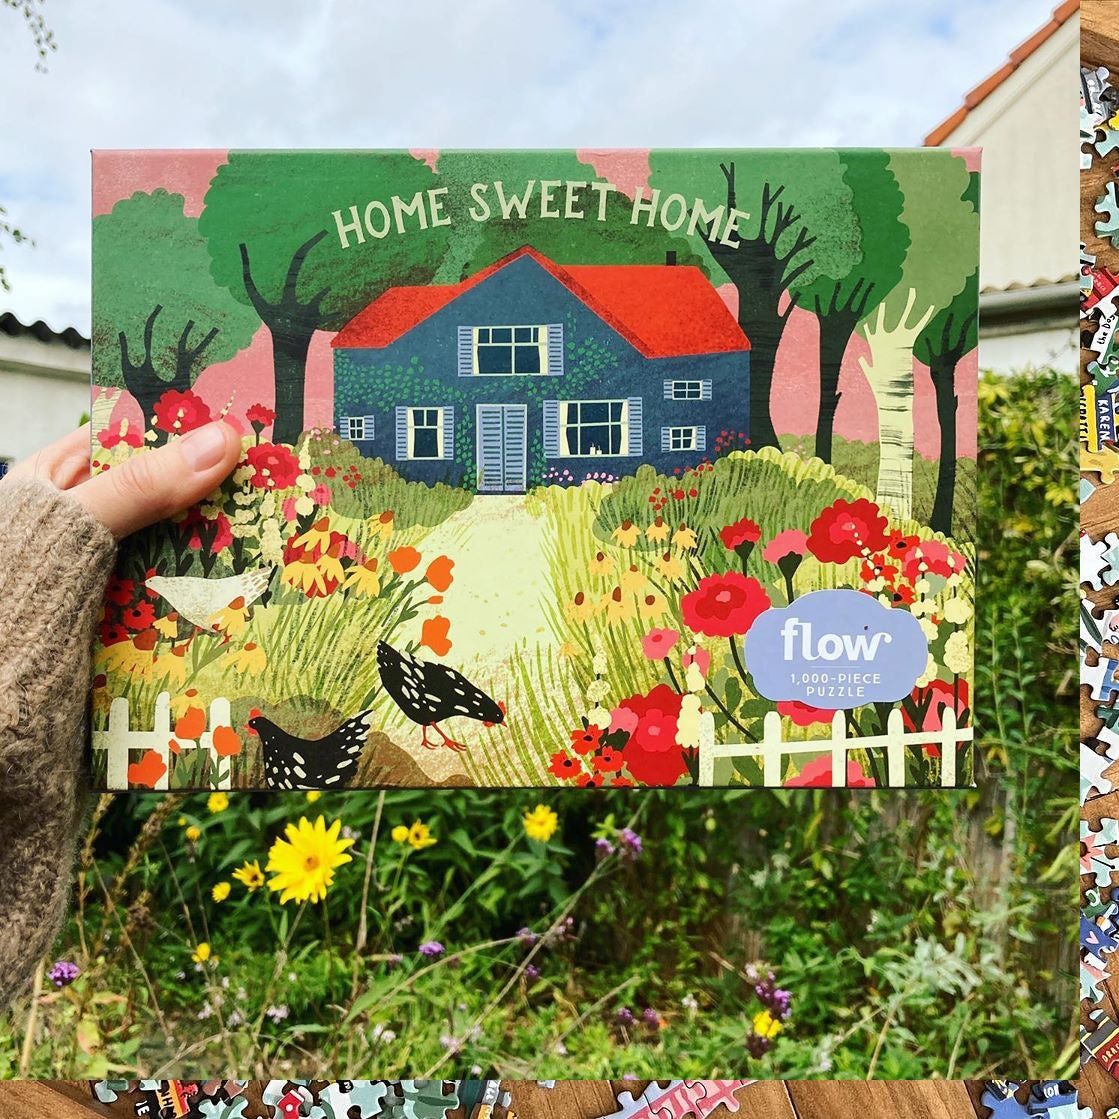 Flow 1000 Piece Jigsaw Puzzle - Home Sweet Home